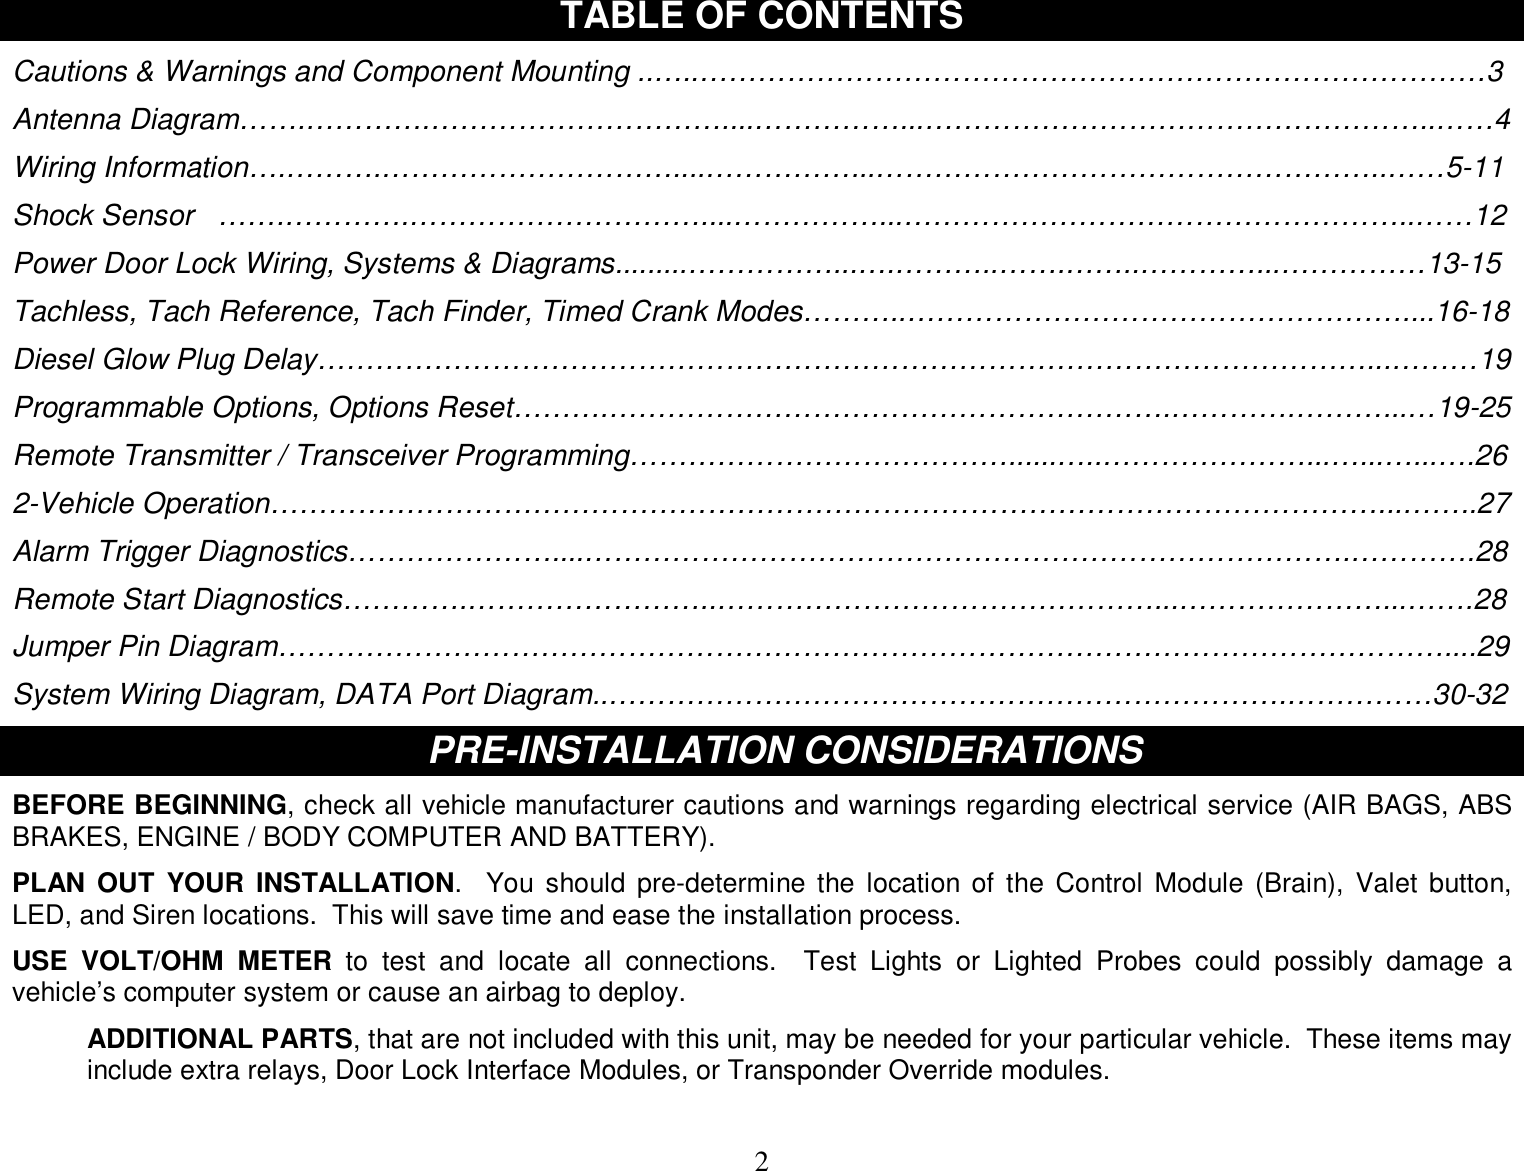  2 TABLE OF CONTENTS  Cautions &amp; Warnings and Component Mounting ..…..………………………………………………………………………3  Antenna Diagram…….………….…………………………....……………...……………………………………………..……4  Wiring Information….……….…………………………....……………...……………………………………………..……5-11  Shock Sensor   …….………….…………………………....……………...……………………………………………..……12  Power Door Lock Wiring, Systems &amp; Diagrams.........……………...….………..…….……..…………...……………13-15  Tachless, Tach Reference, Tach Finder, Timed Crank Modes………..……………………………………………....16-18  Diesel Glow Plug Delay………………………………………………………………………………………………...………19  Programmable Options, Options Reset……….………………………………………………….………….………...…19-25  Remote Transmitter / Transceiver Programming…………………………………......…..…………………...…...…...….26  2-Vehicle Operation……………………………………………………………………………………………………...……..27  Alarm Trigger Diagnostics…………………....…………………………………………………………………….………….28  Remote Start Diagnostics………….……………………..………………………………………...…………………...…….28  Jumper Pin Diagram…………………………………………………………………………………………………………....29  System Wiring Diagram, DATA Port Diagram..…………………………………………………………….……………30-32  PR PRE-INSTALLATION CONSIDERATIONS  BEFORE BEGINNING, check all vehicle manufacturer cautions and warnings regarding electrical service (AIR BAGS, ABS BRAKES, ENGINE / BODY COMPUTER AND BATTERY).  PLAN OUT YOUR INSTALLATION.  You should pre-determine the location of the Control Module (Brain), Valet button, LED, and Siren locations.  This will save time and ease the installation process.  USE VOLT/OHM METER to test and locate all connections.  Test Lights or Lighted Probes could possibly damage a vehicle’s computer system or cause an airbag to deploy.  ADDITIONAL PARTS, that are not included with this unit, may be needed for your particular vehicle.  These items may include extra relays, Door Lock Interface Modules, or Transponder Override modules.  